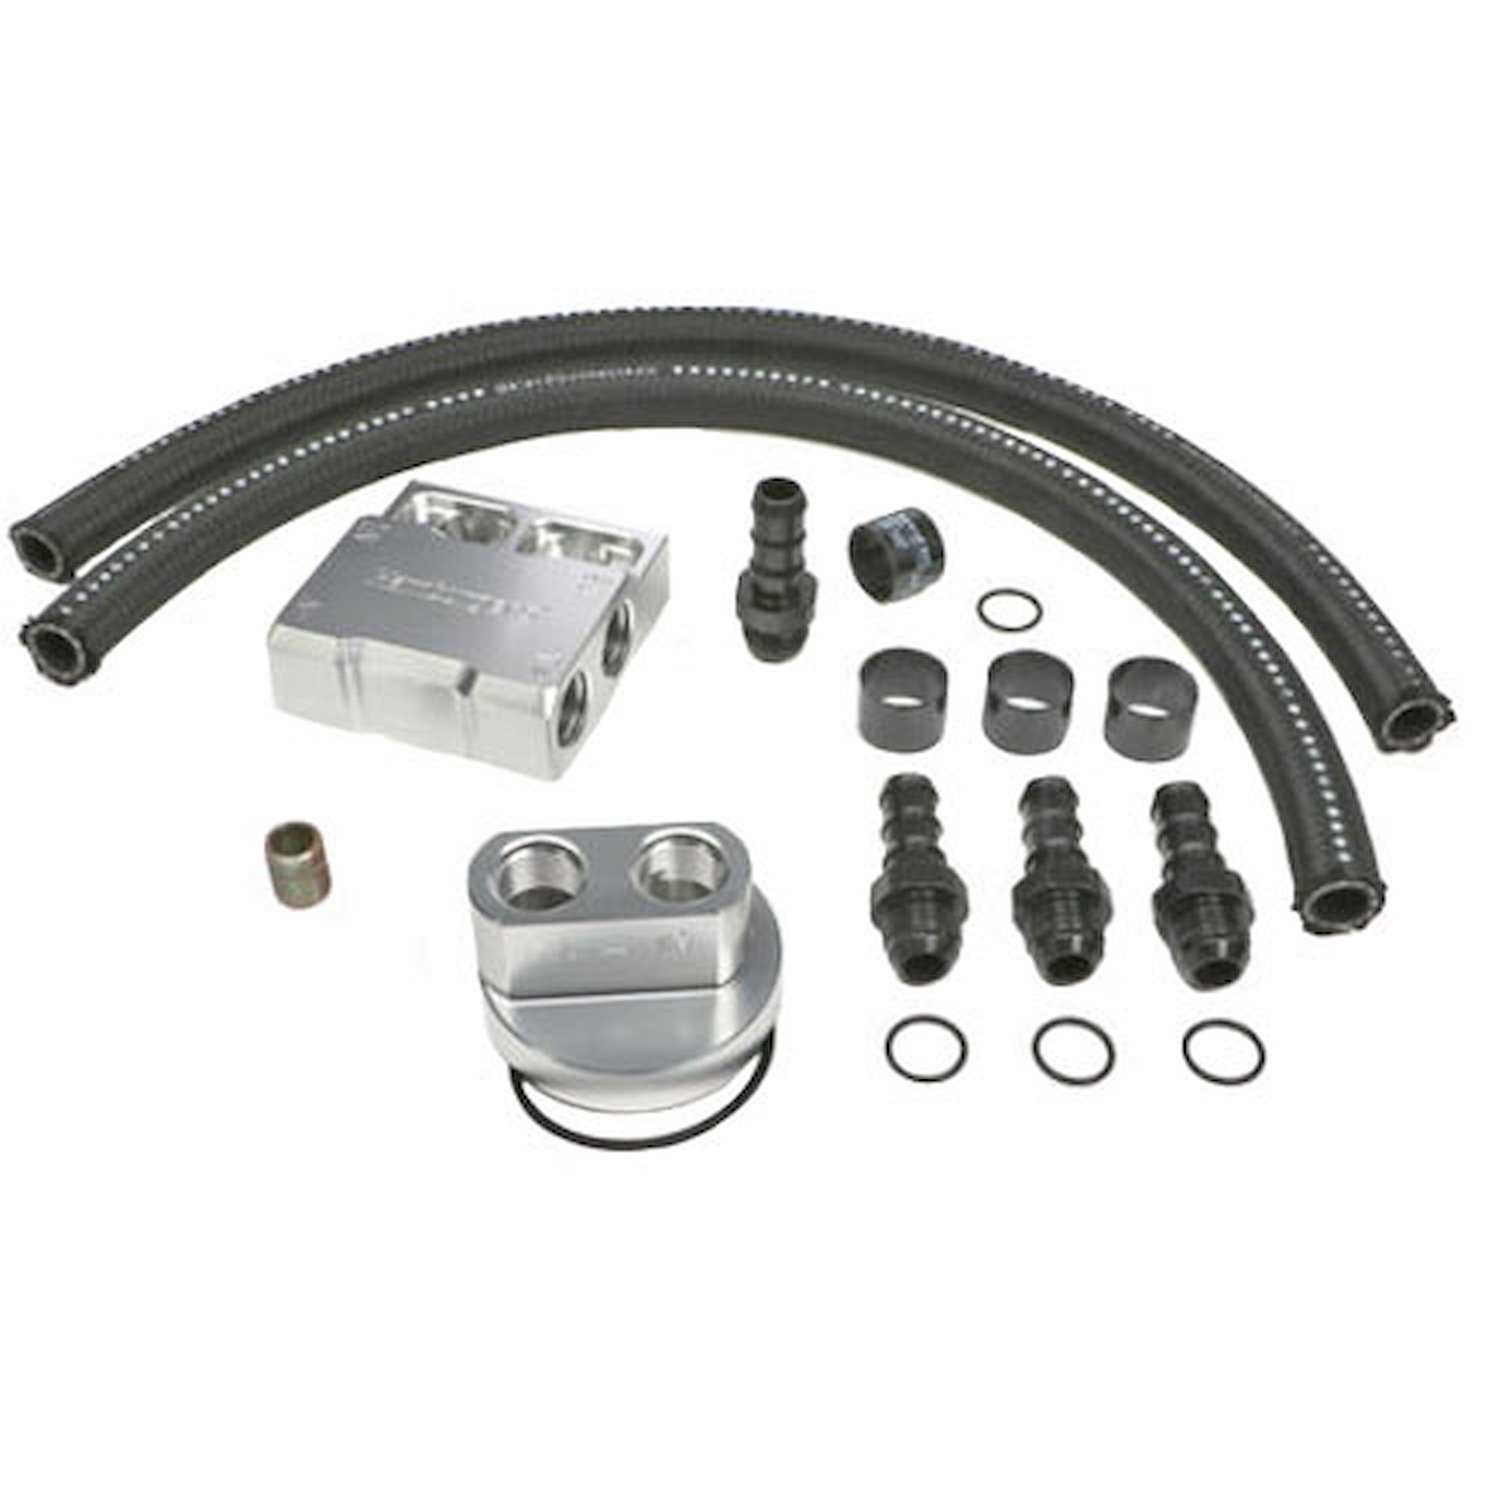 BILLET SINGLE OIL FILTER RELOCATION KIT-SB CHEVY / BB CHEVY